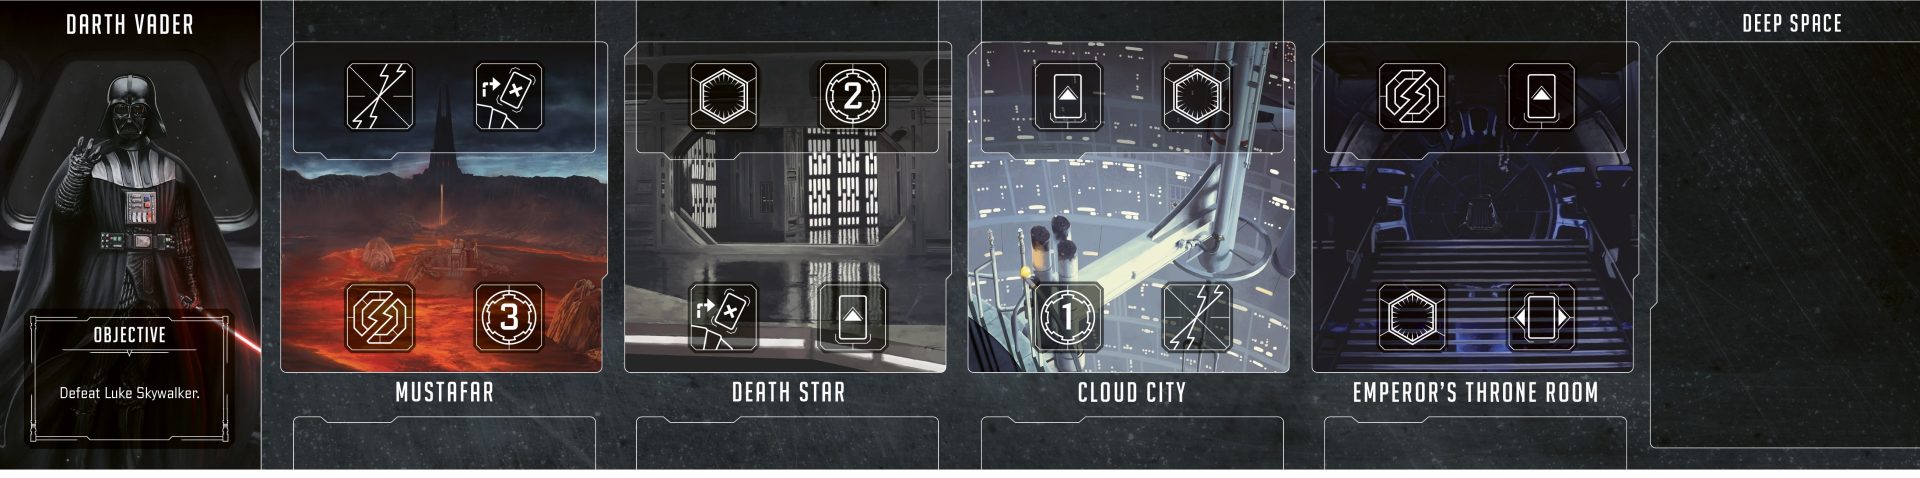 A sample of Darth Vader's objectives and tokens in Star Wars Villainous